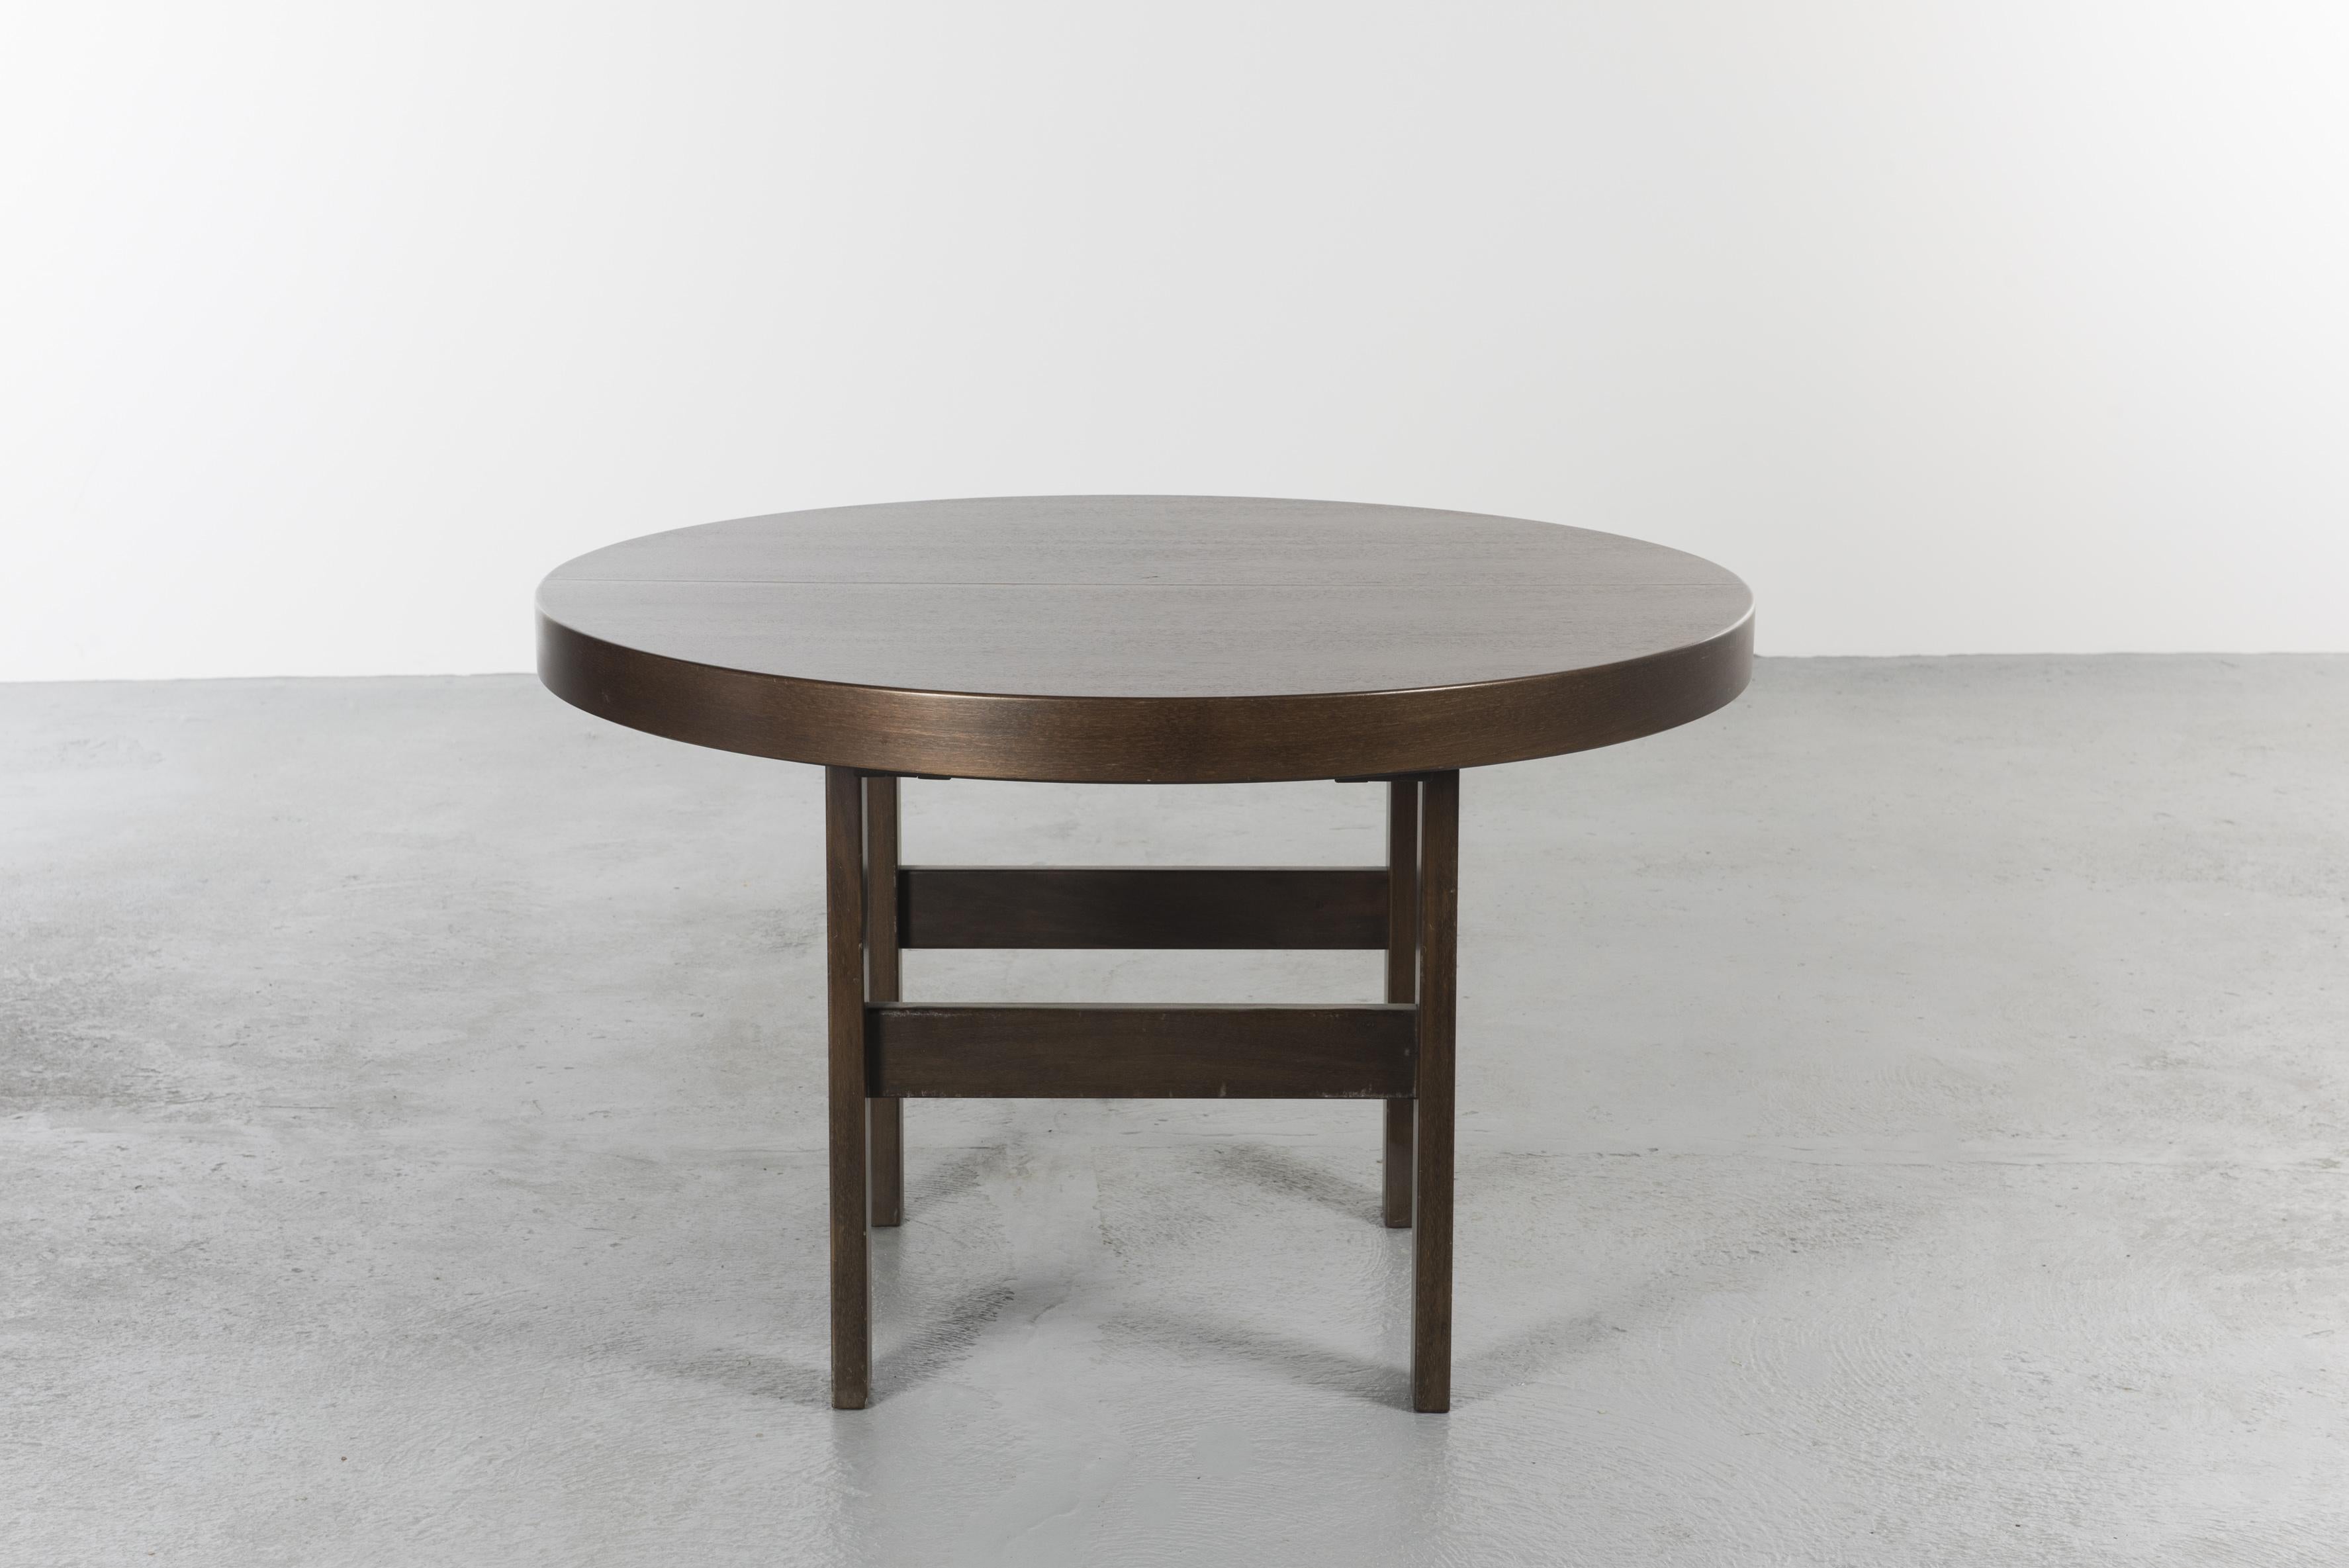 Swiss Round/Oval Table with Extension Leaves in Veneered Oak, Black Stained, 1960s For Sale